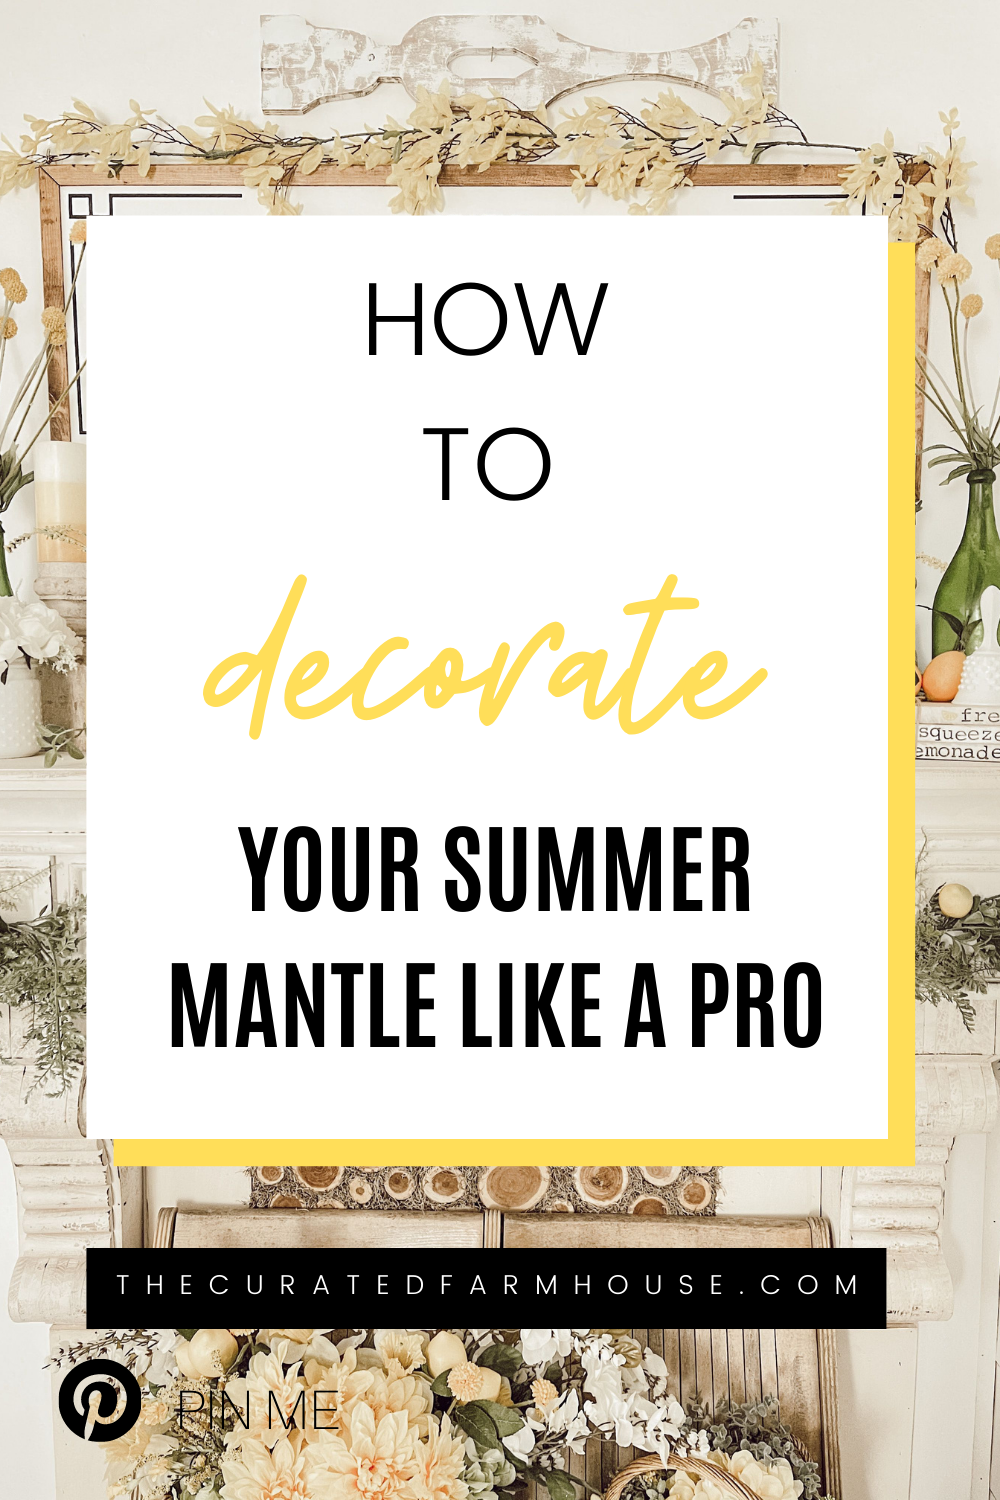 How To Decorate Your Summer Mantle Like a Pro